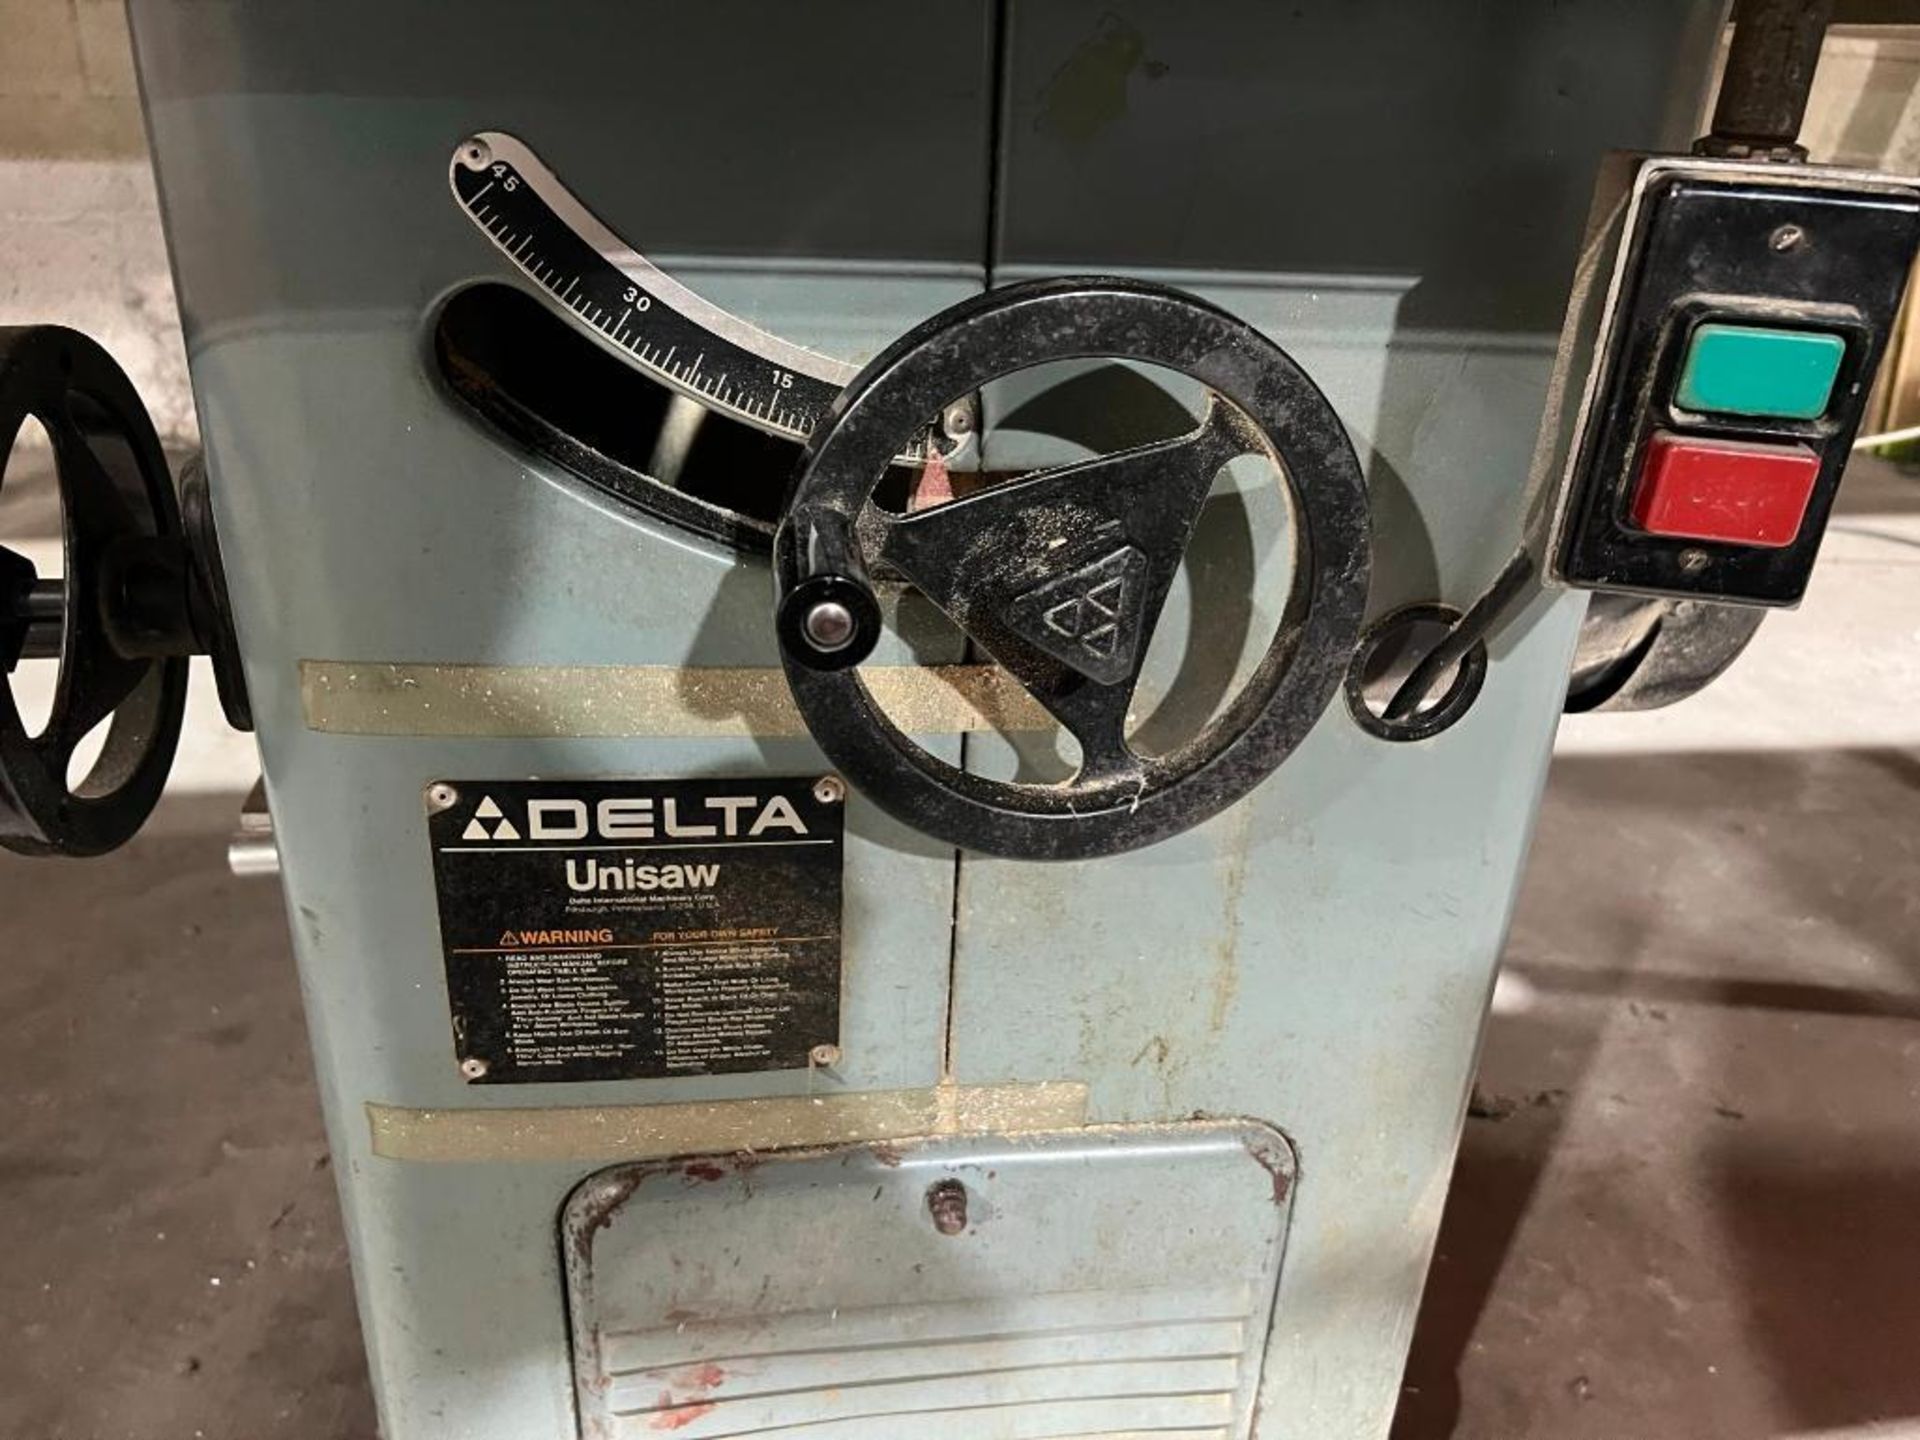 Delta Unisaw Table Saw, S/N 86B00540, 3 Phase Motor - Image 11 of 19